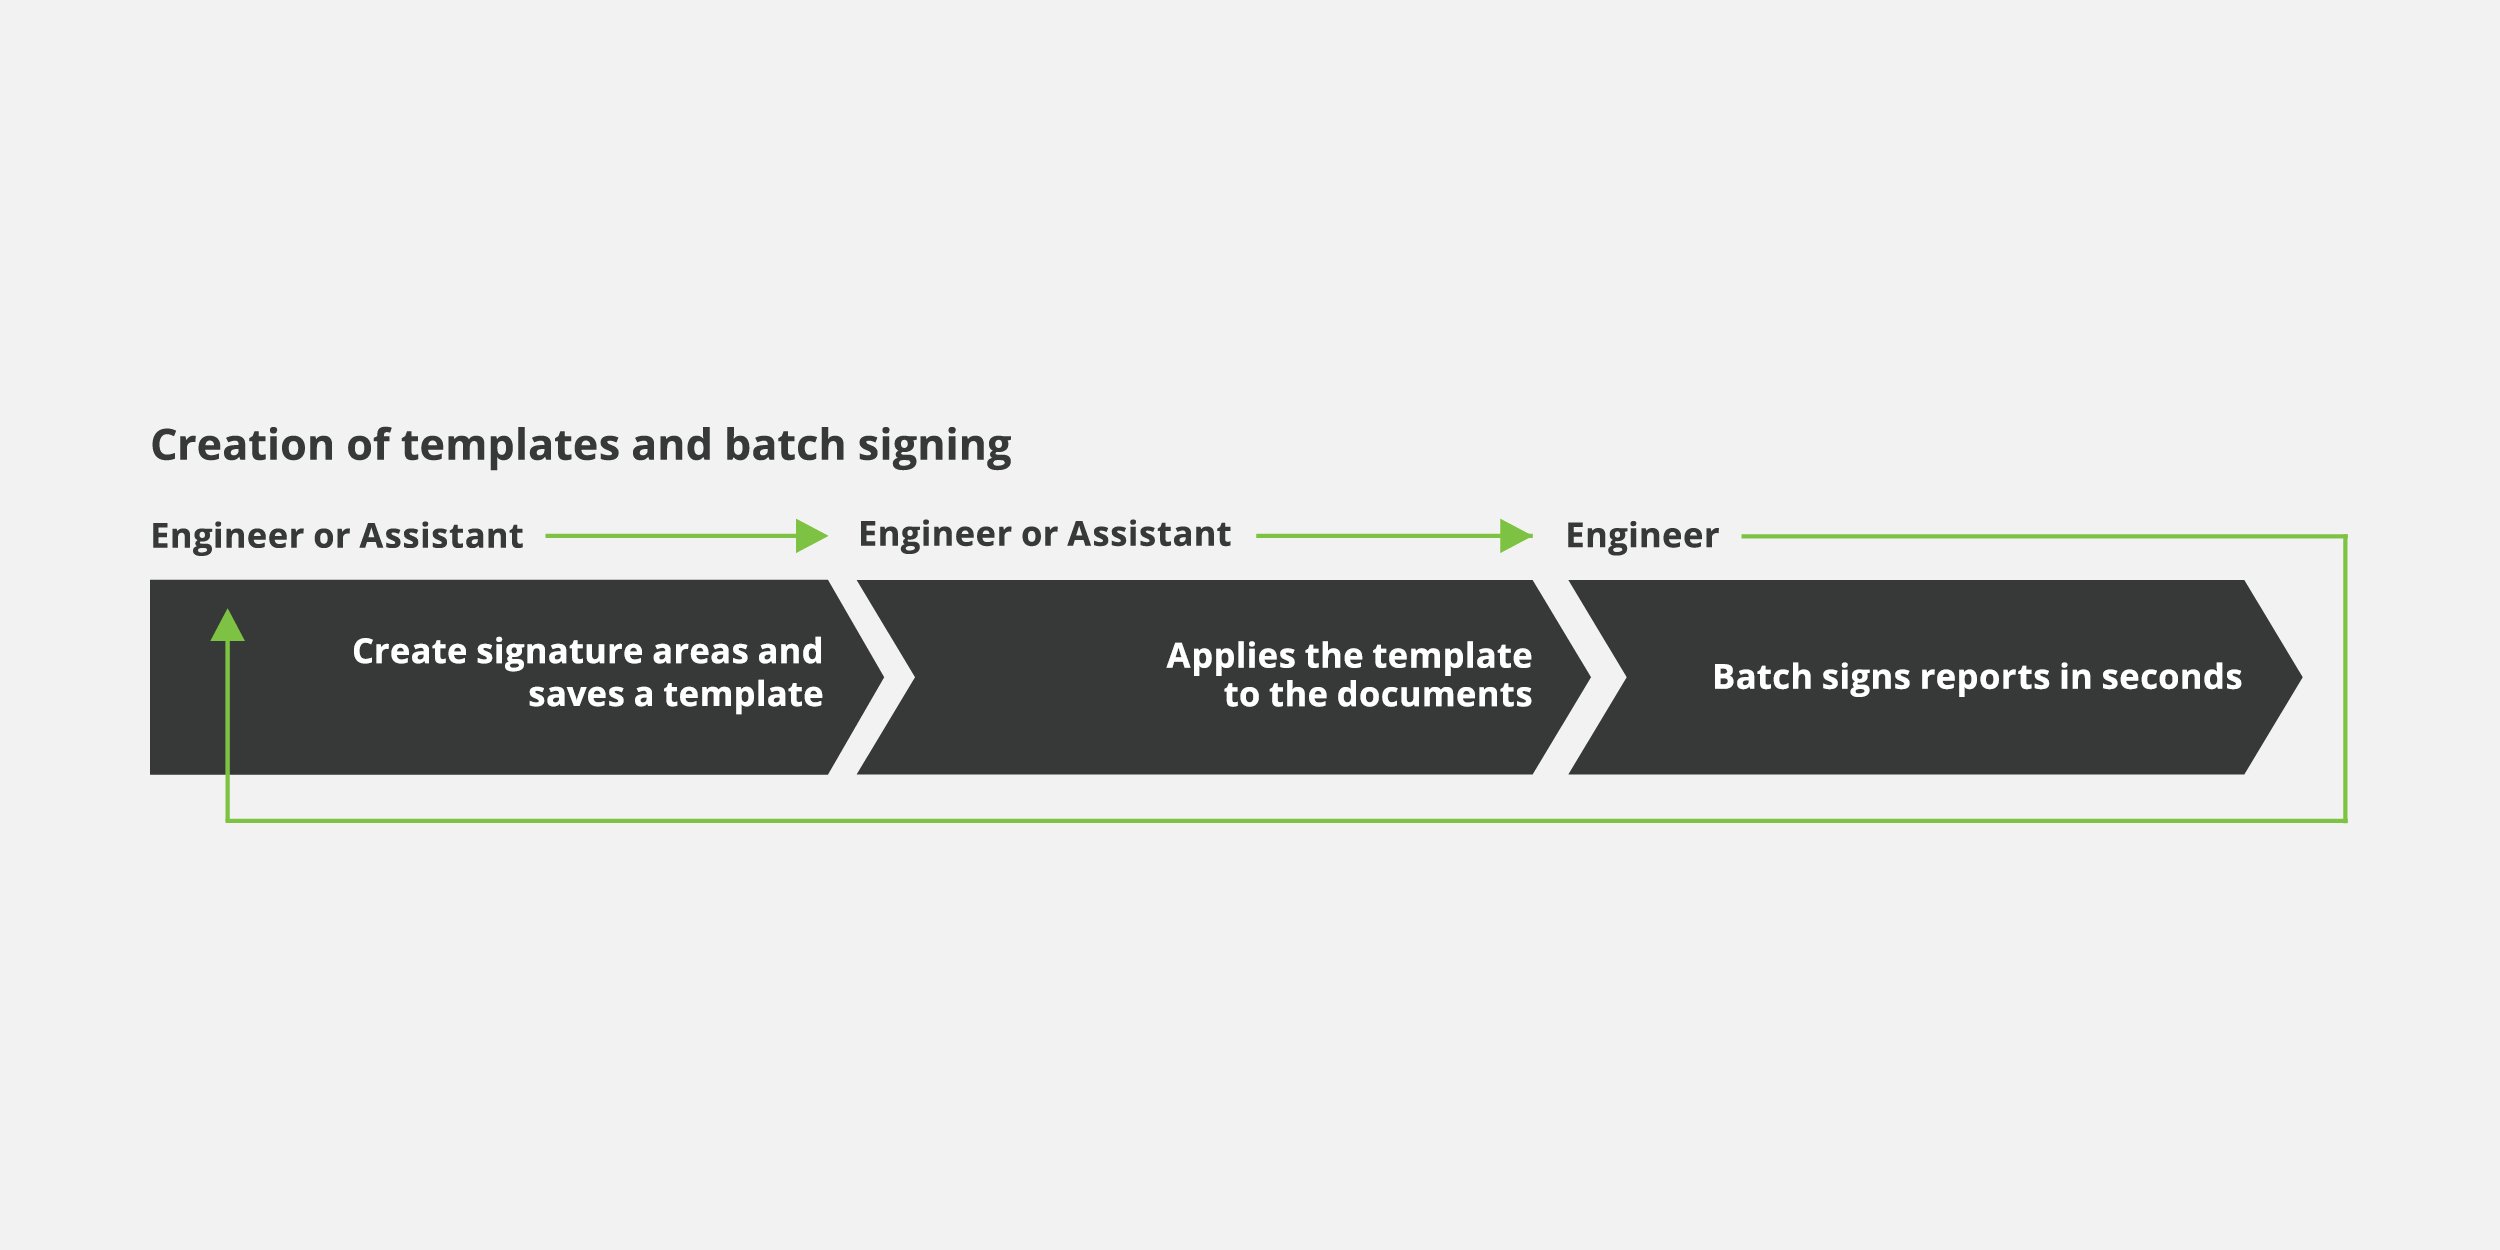 Creation of templates and batch signing